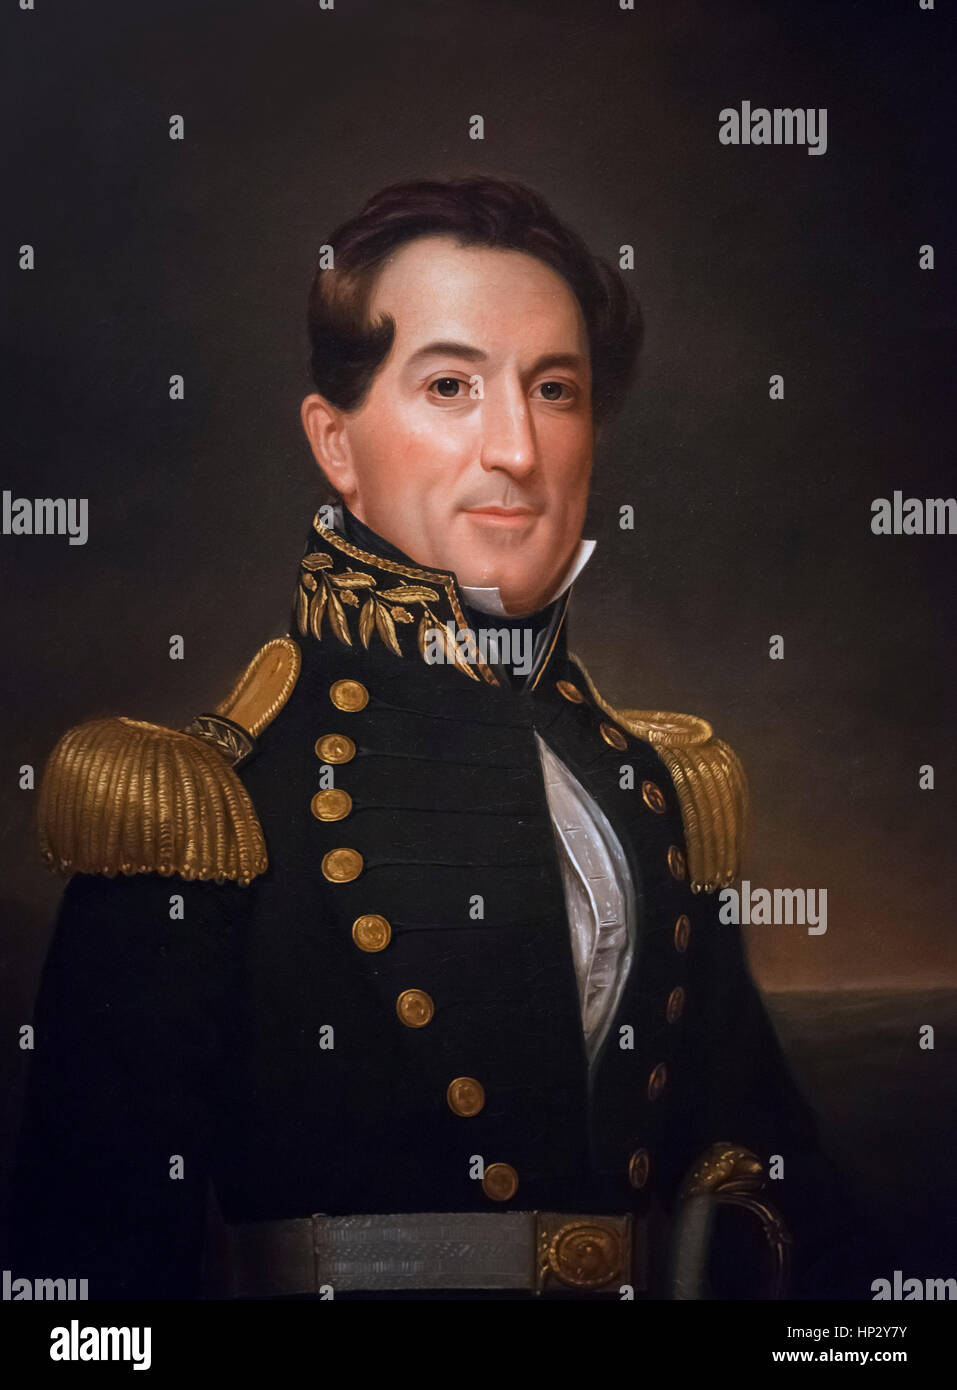 Admiral Farragut. Portrait of United States Navy Admiral, David Glasgow Farragut (1801-1870) by William Swain, oil on canvas, 1838 Stock Photo